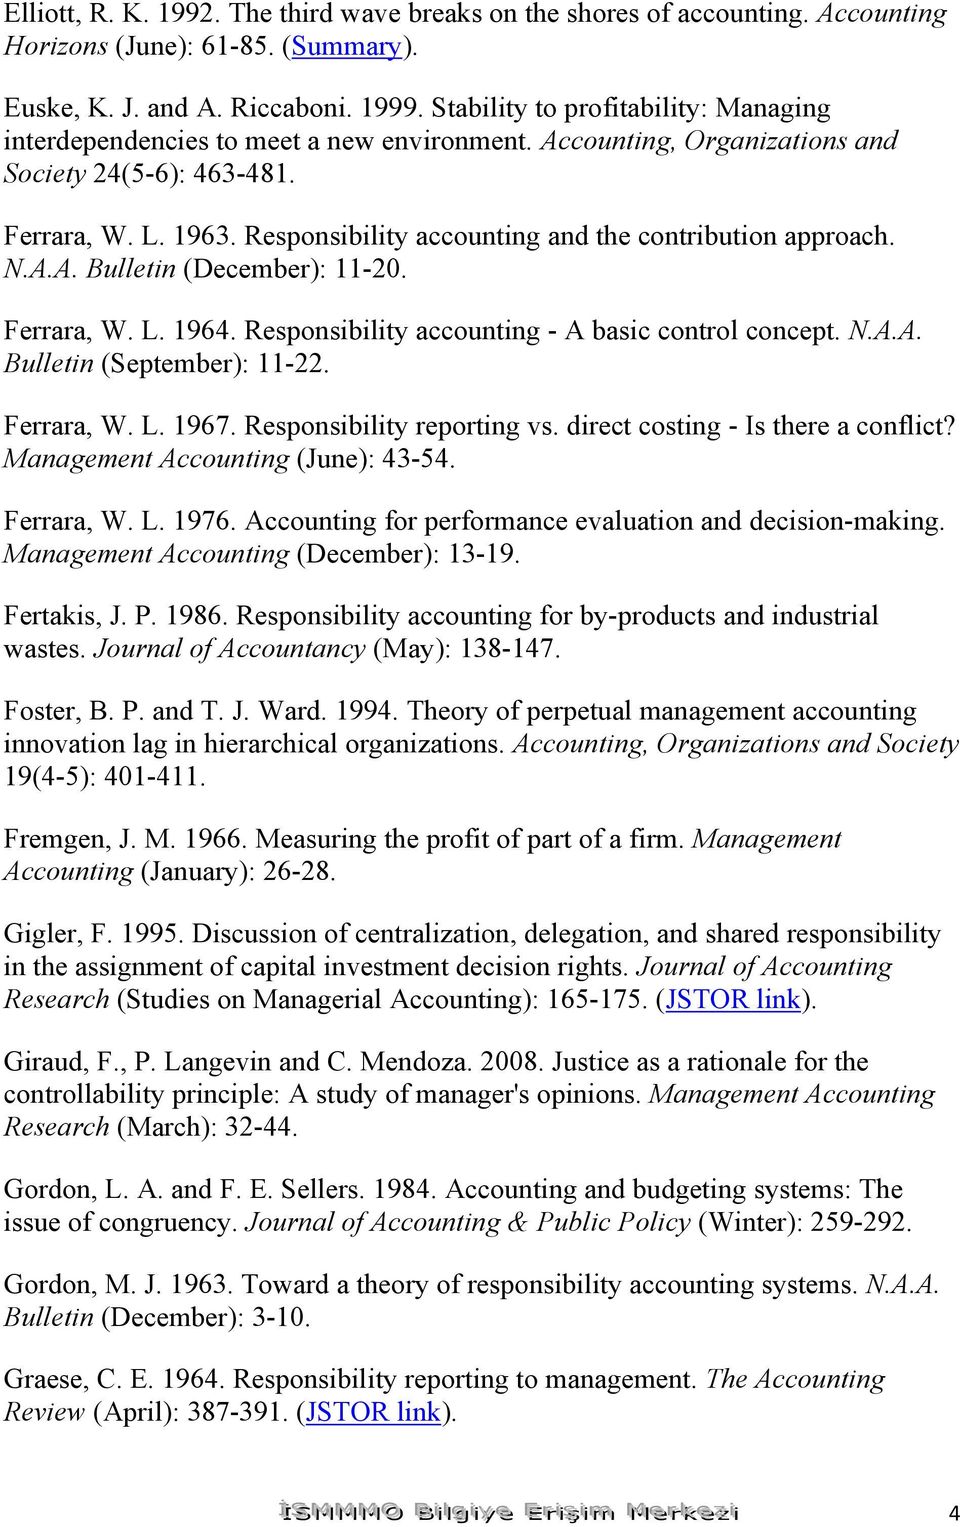 Responsibility accounting and the contribution approach. N.A.A. Bulletin (December): 11-20. Ferrara, W. L. 1964. Responsibility accounting - A basic control concept. N.A.A. Bulletin (September): 11-22.